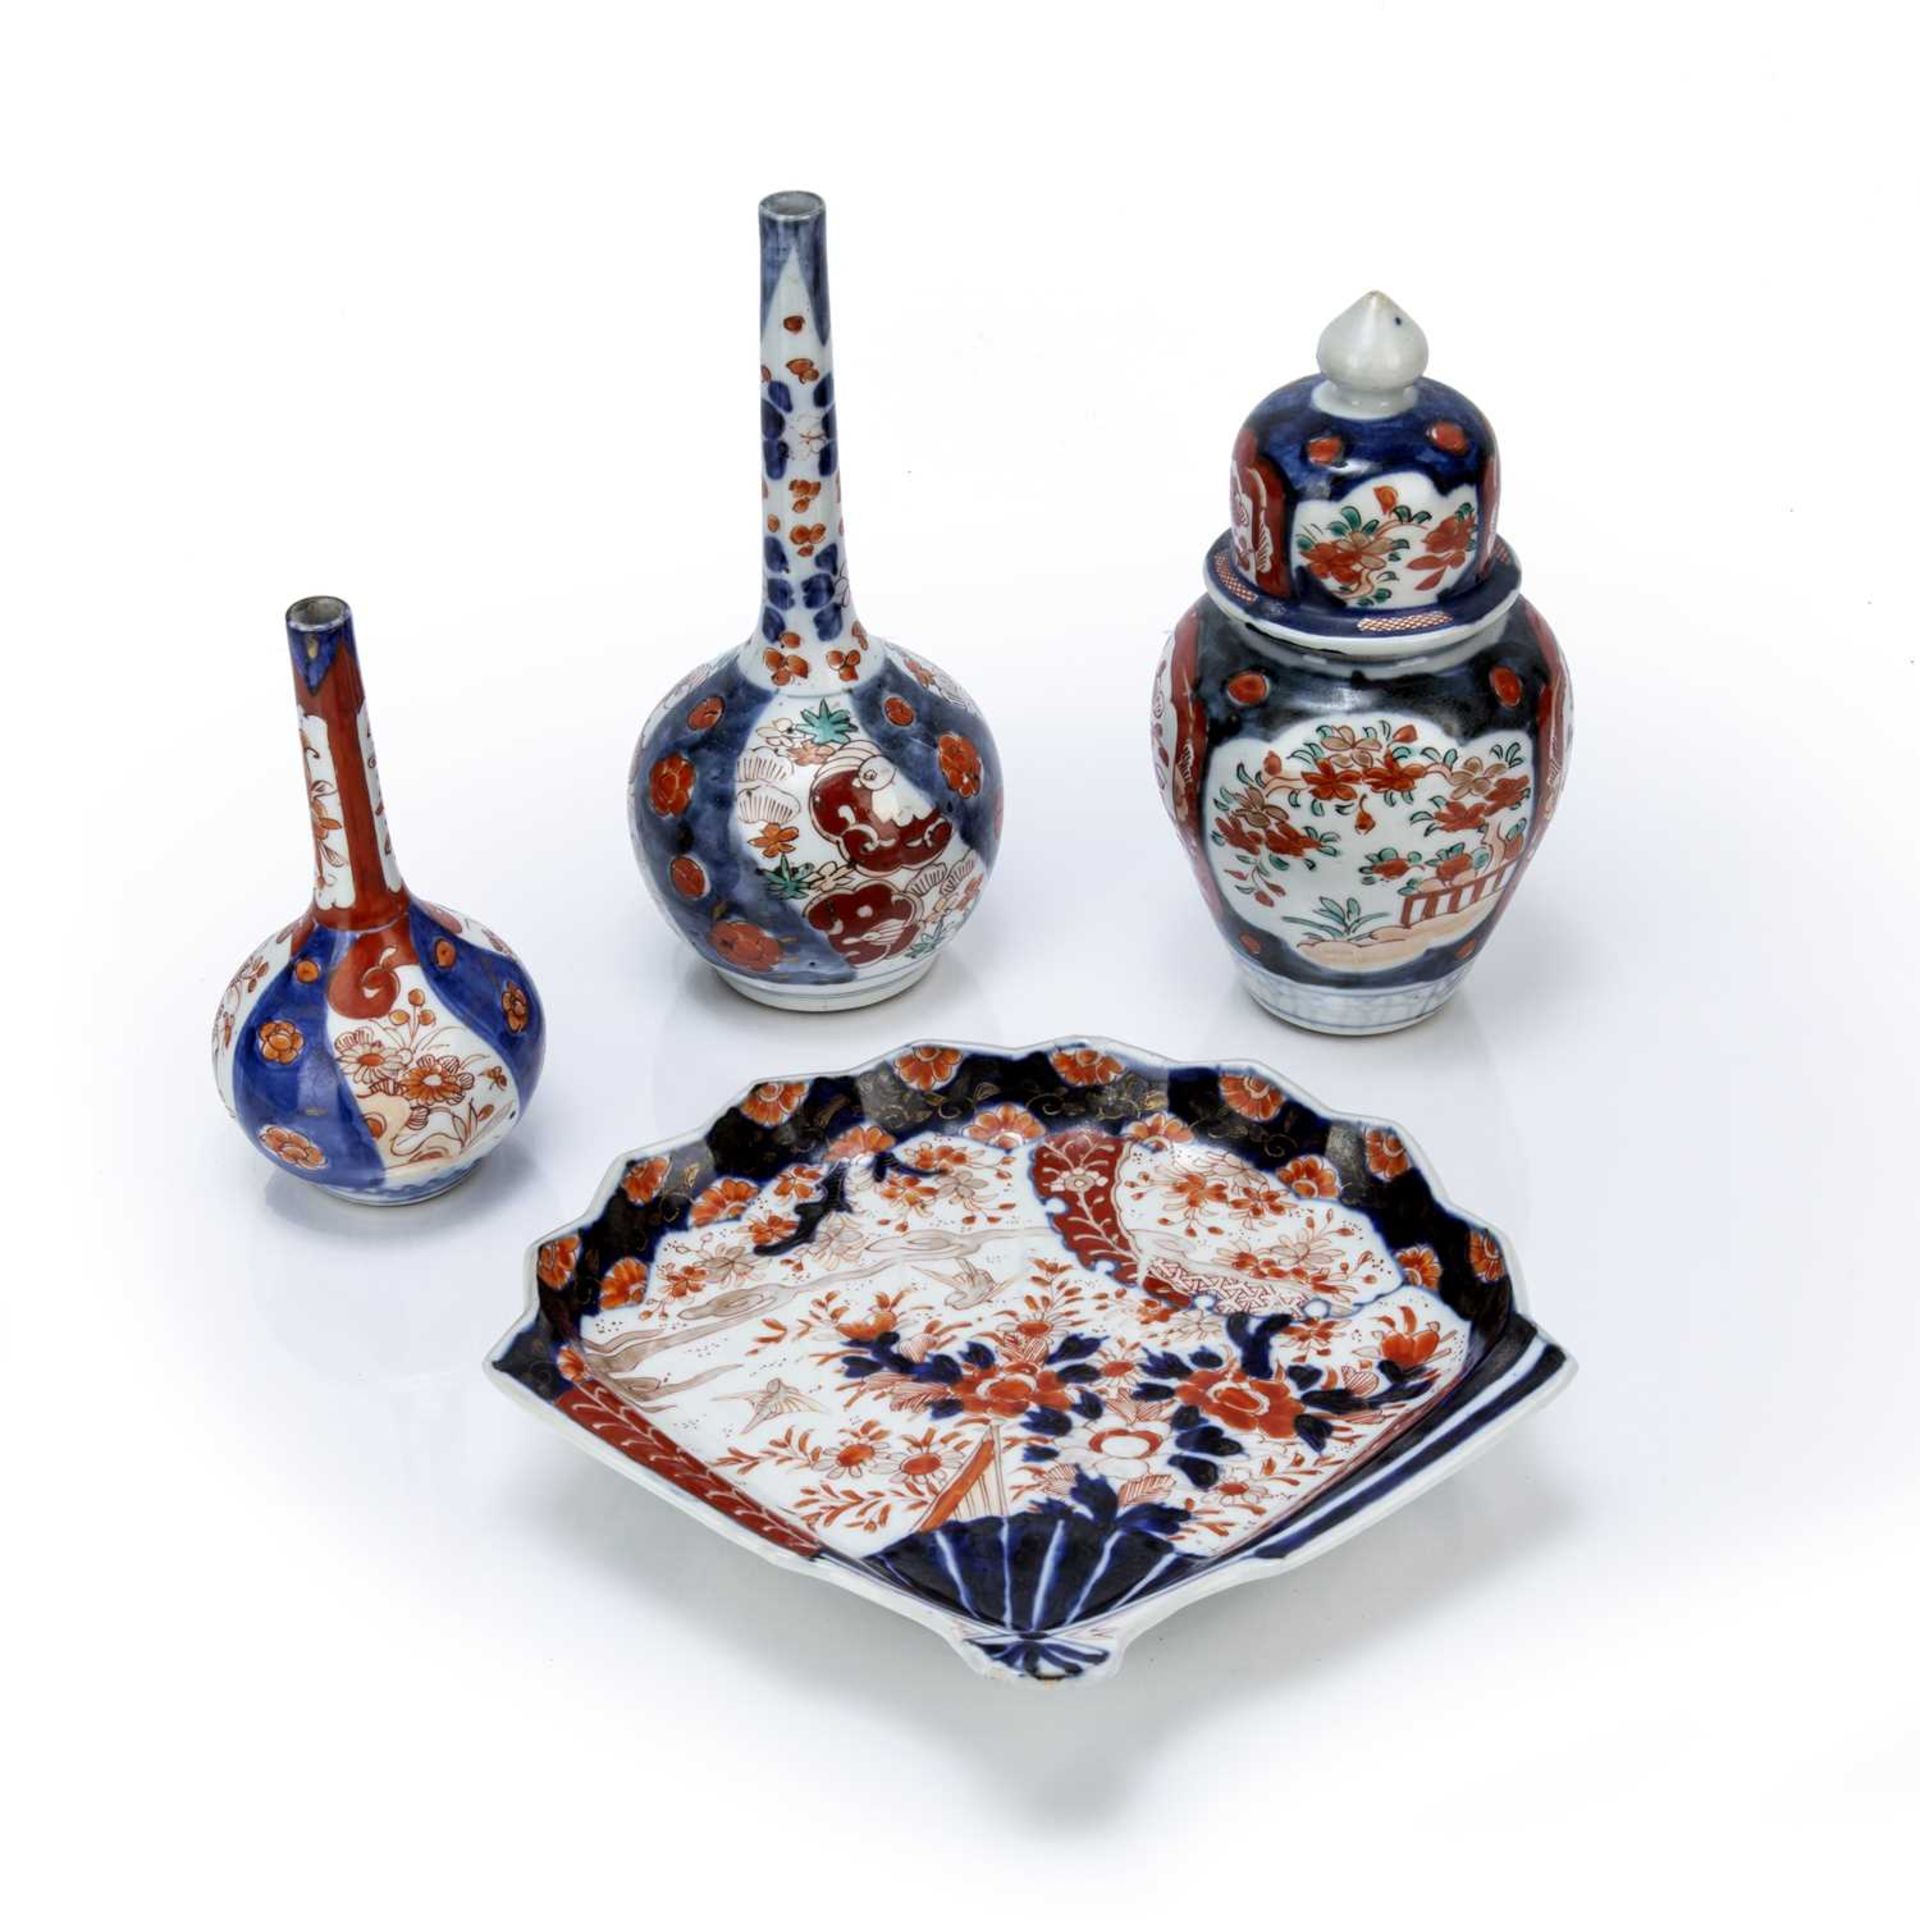 Small group of Imari Japanese, including a fan shaped dish, 23cm wide, two bottle vases, 15cm and